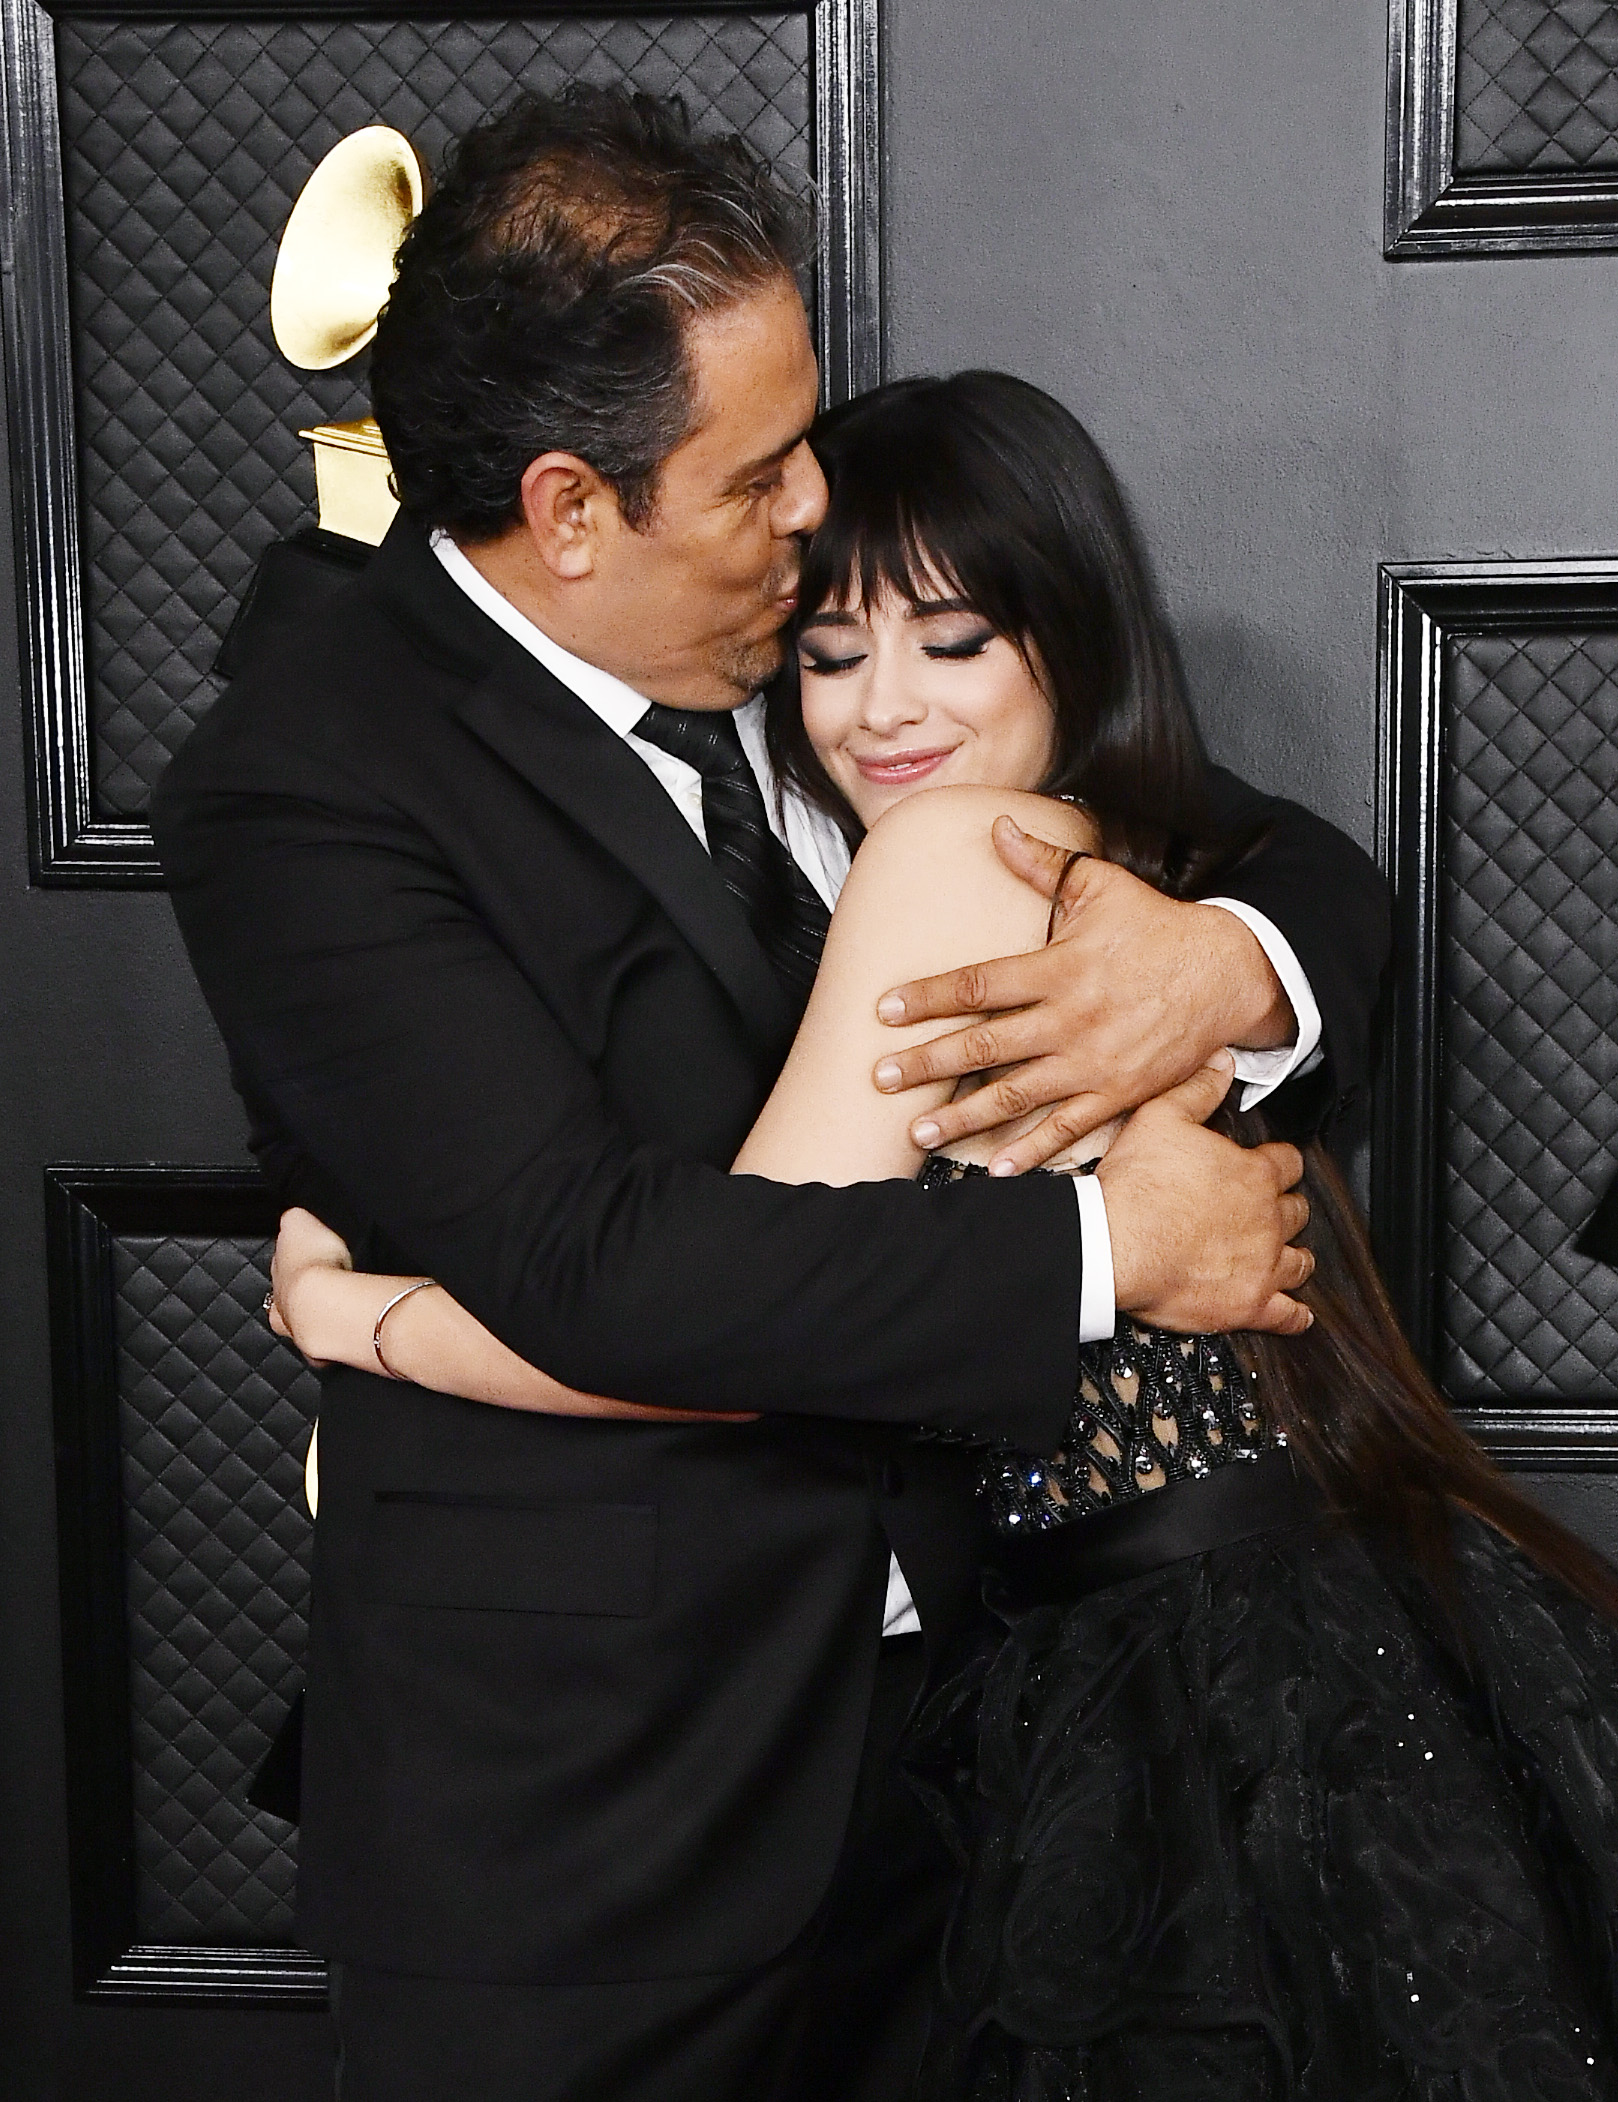 (L-R) Alejandro Cabello and Camila Cabello attend the 62nd Annual Grammy Awards at the Staples Center on Jan. 26, 2020, in Los Angeles, Calif.